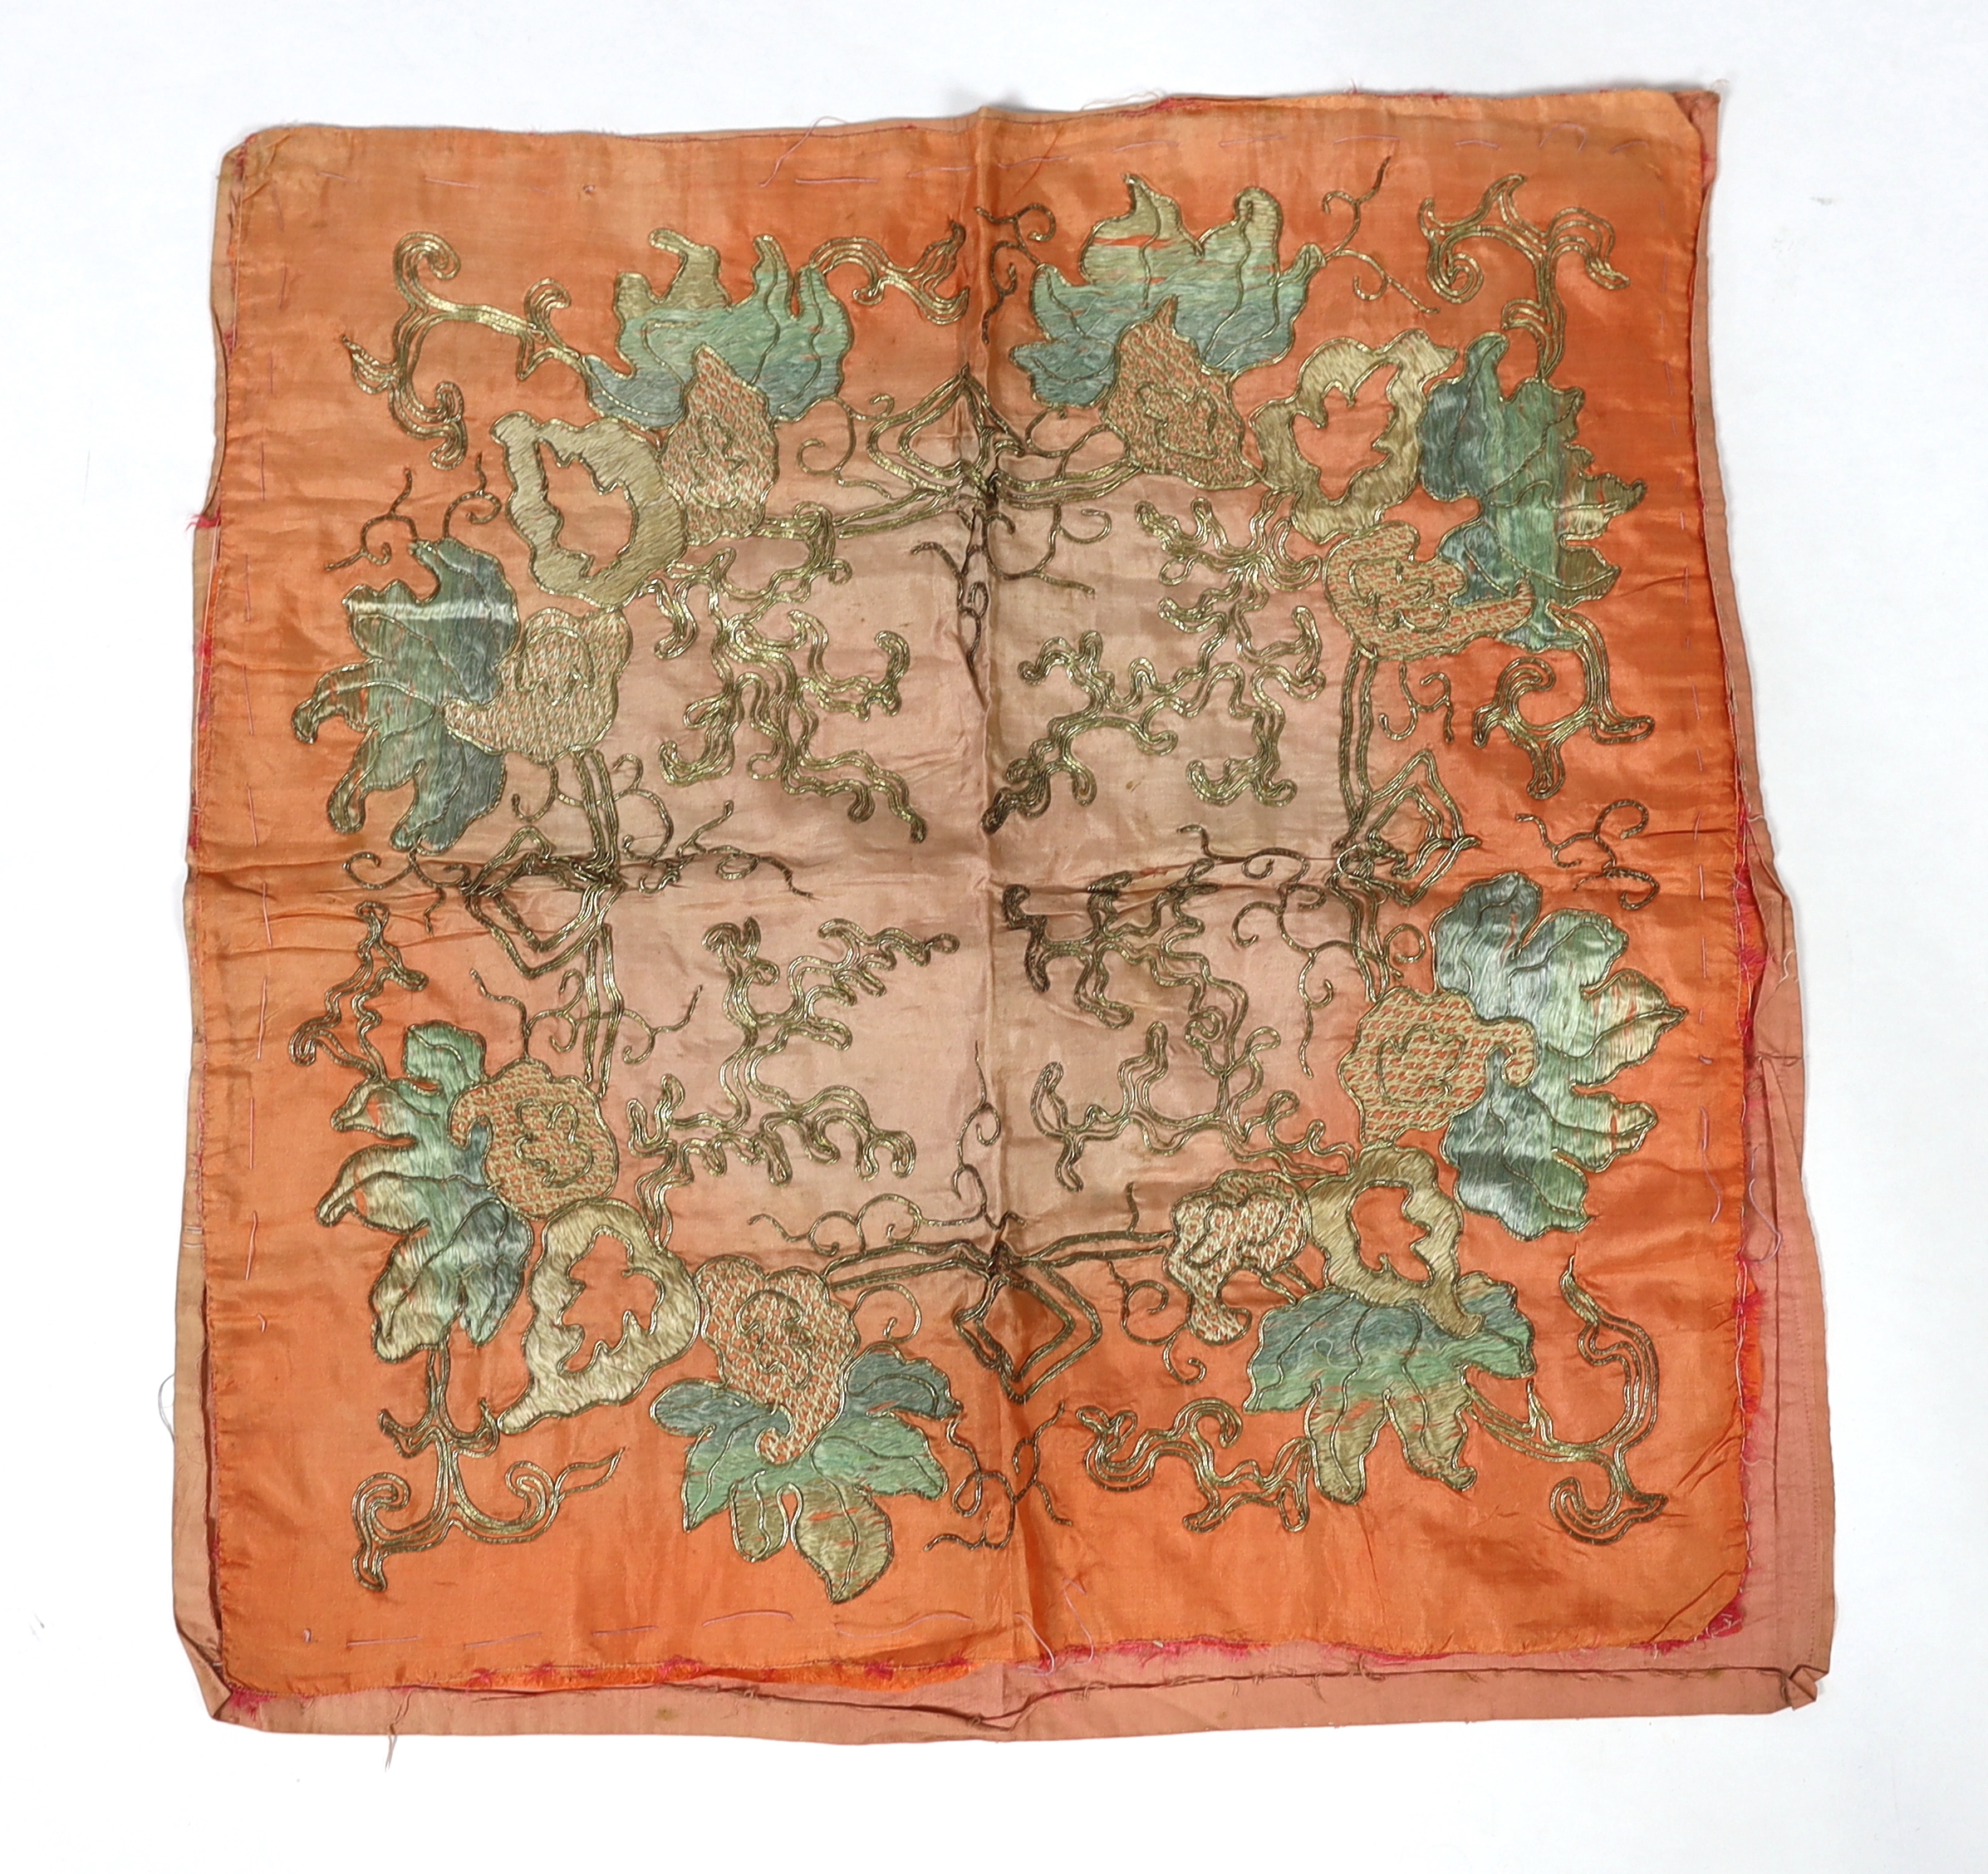 An early 20th century silk crêpe Japanese kimono and fringed tie belt, the back panel heavily embroidered with trailing chrysanthemum type flowers and leaves. This item is being sold for the back panel only and is with a